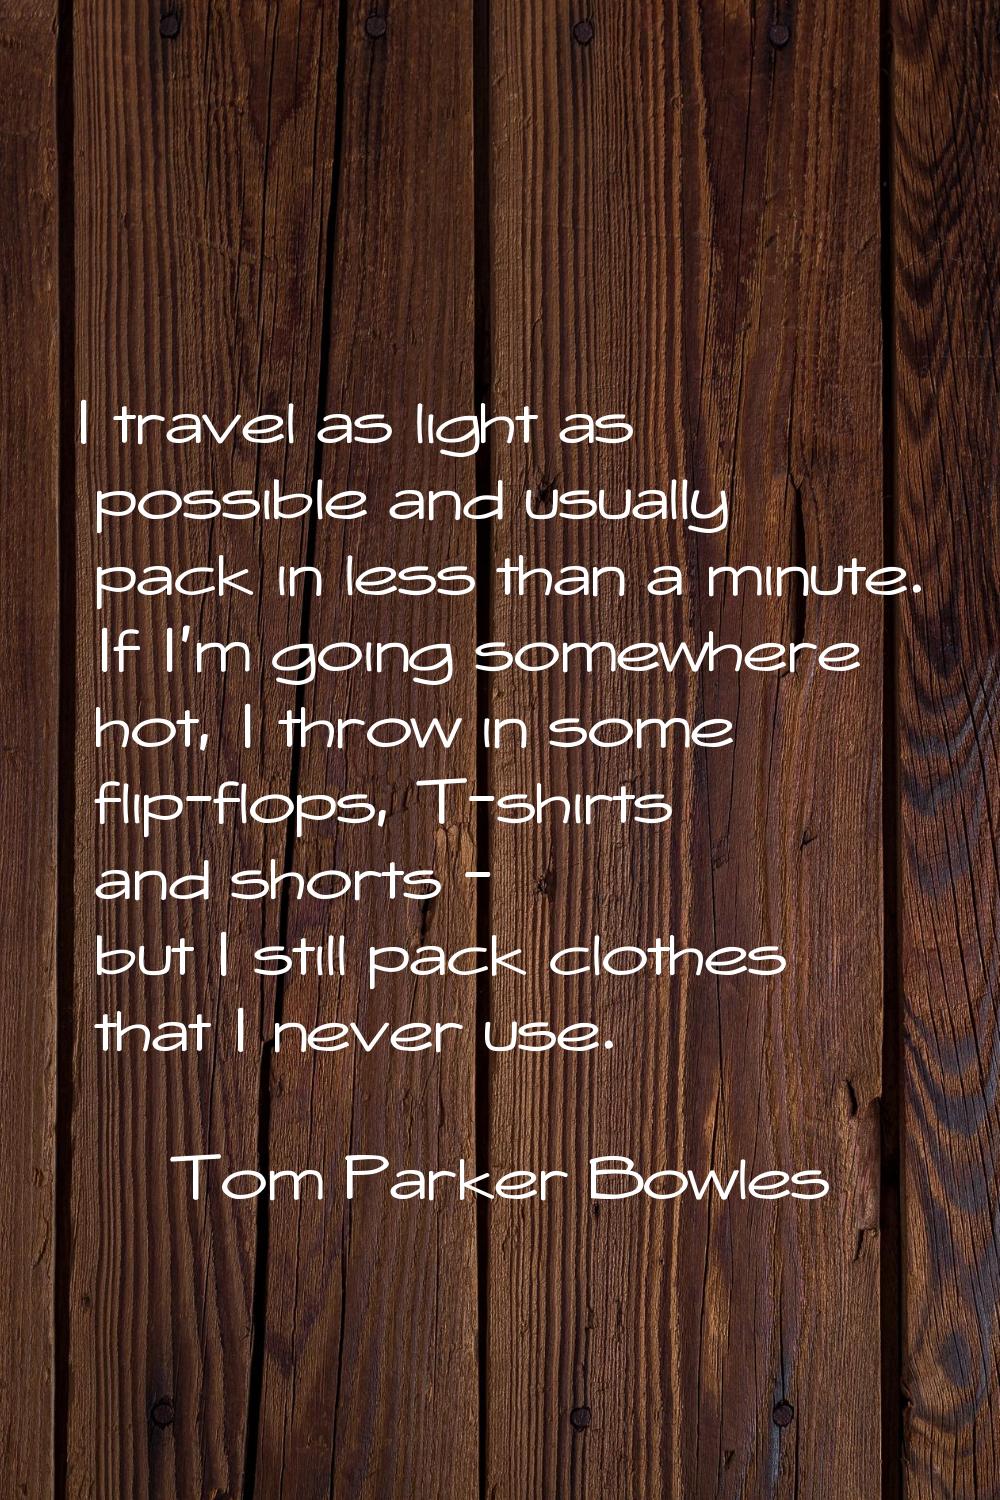 I travel as light as possible and usually pack in less than a minute. If I'm going somewhere hot, I